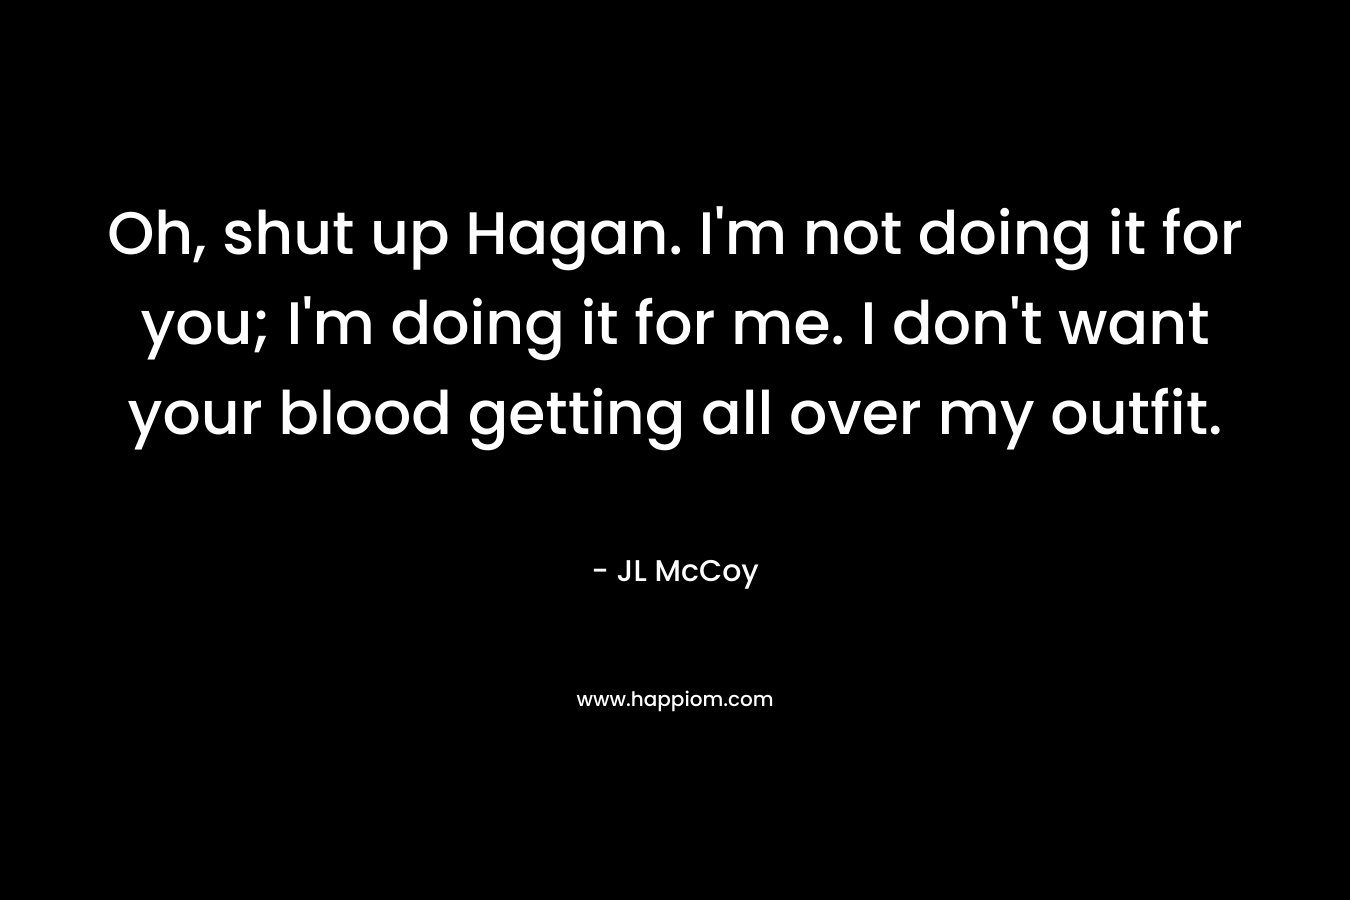 Oh, shut up Hagan. I'm not doing it for you; I'm doing it for me. I don't want your blood getting all over my outfit.